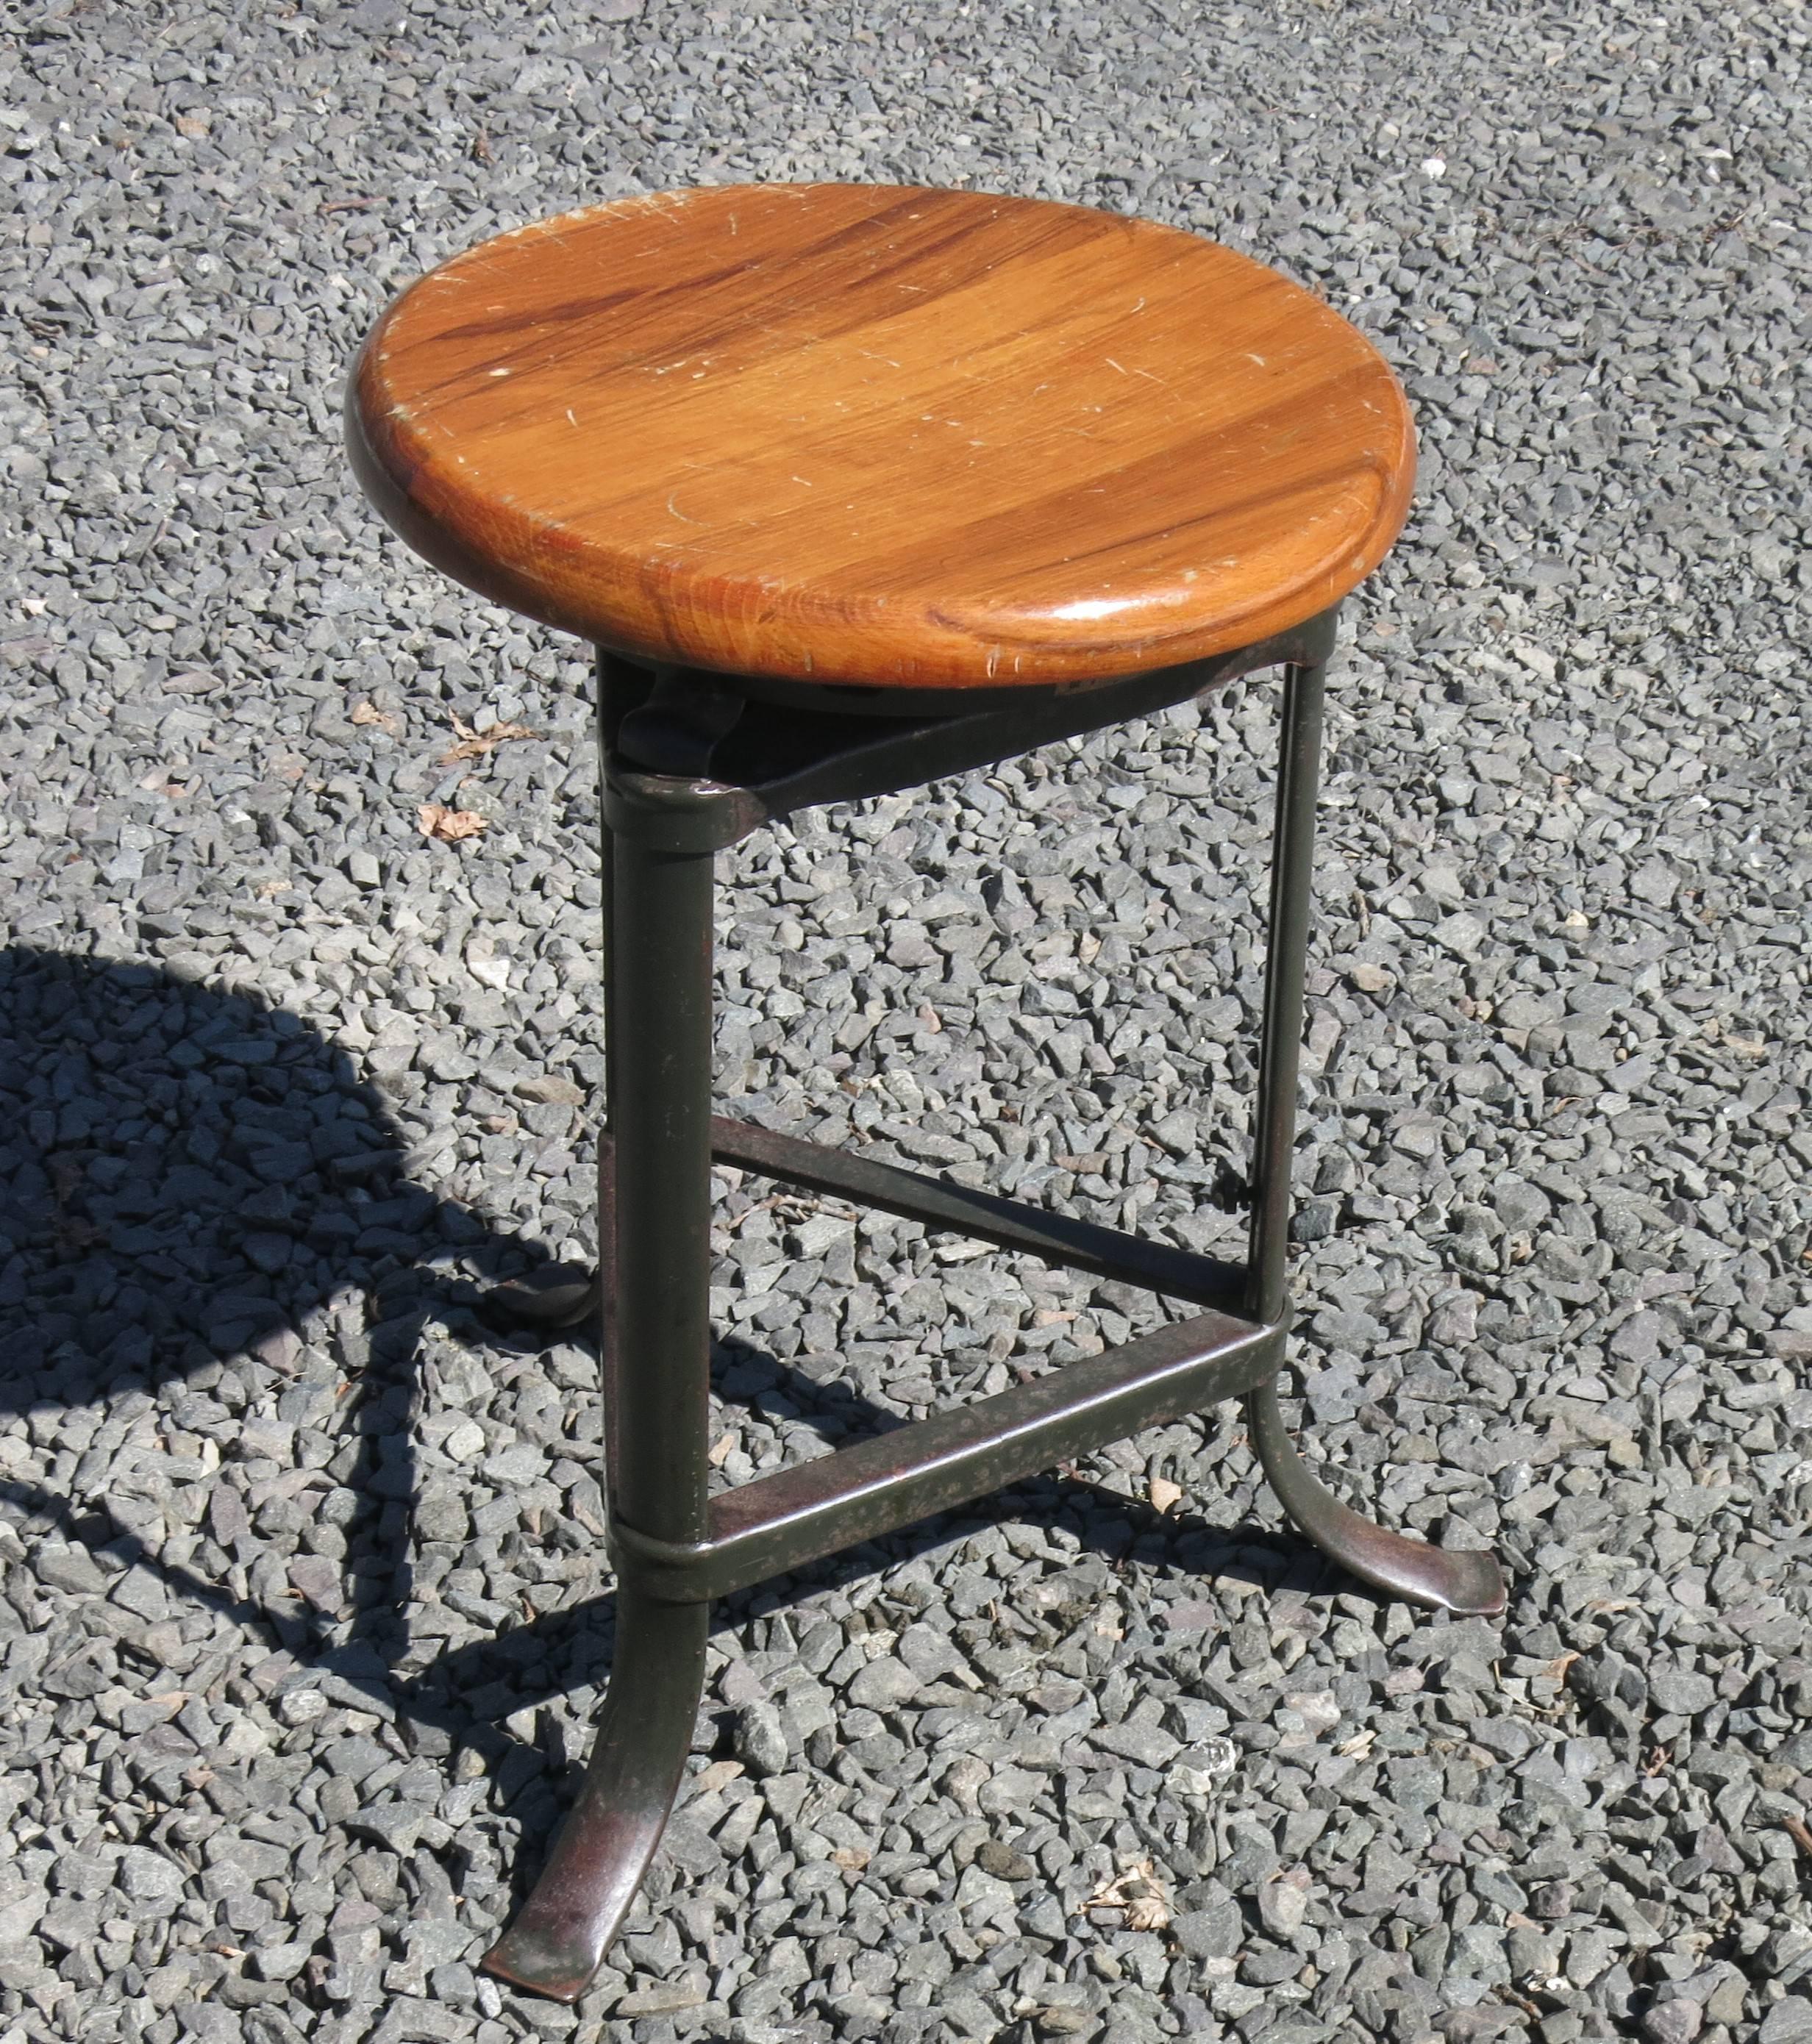 Great looking industrial stool can raise from 20